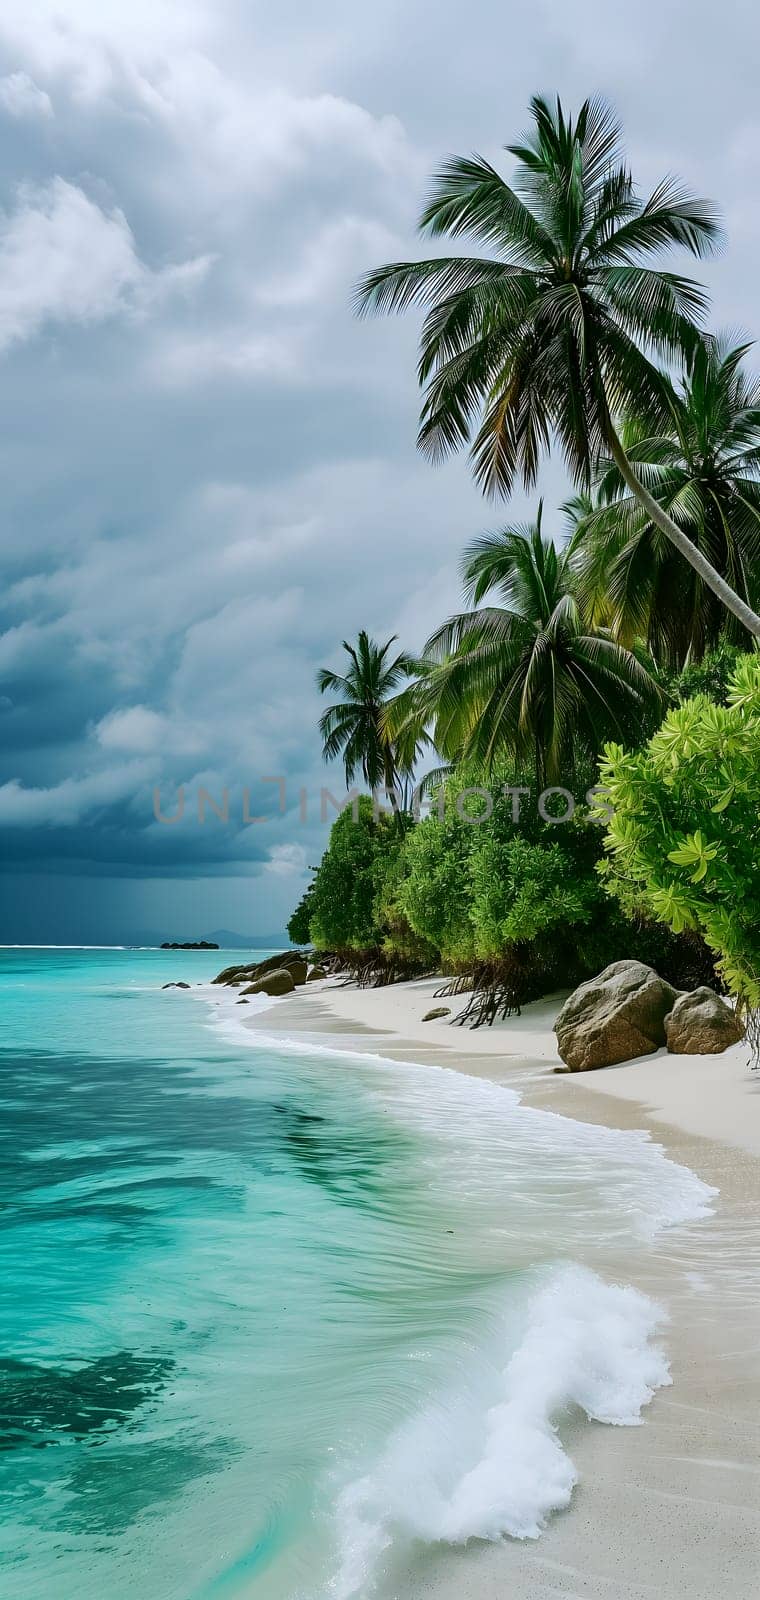 tropical beach view at cloudy stormy day with white sand, turquoise water and palm trees. Neural network generated image. Not based on any actual scene or pattern.